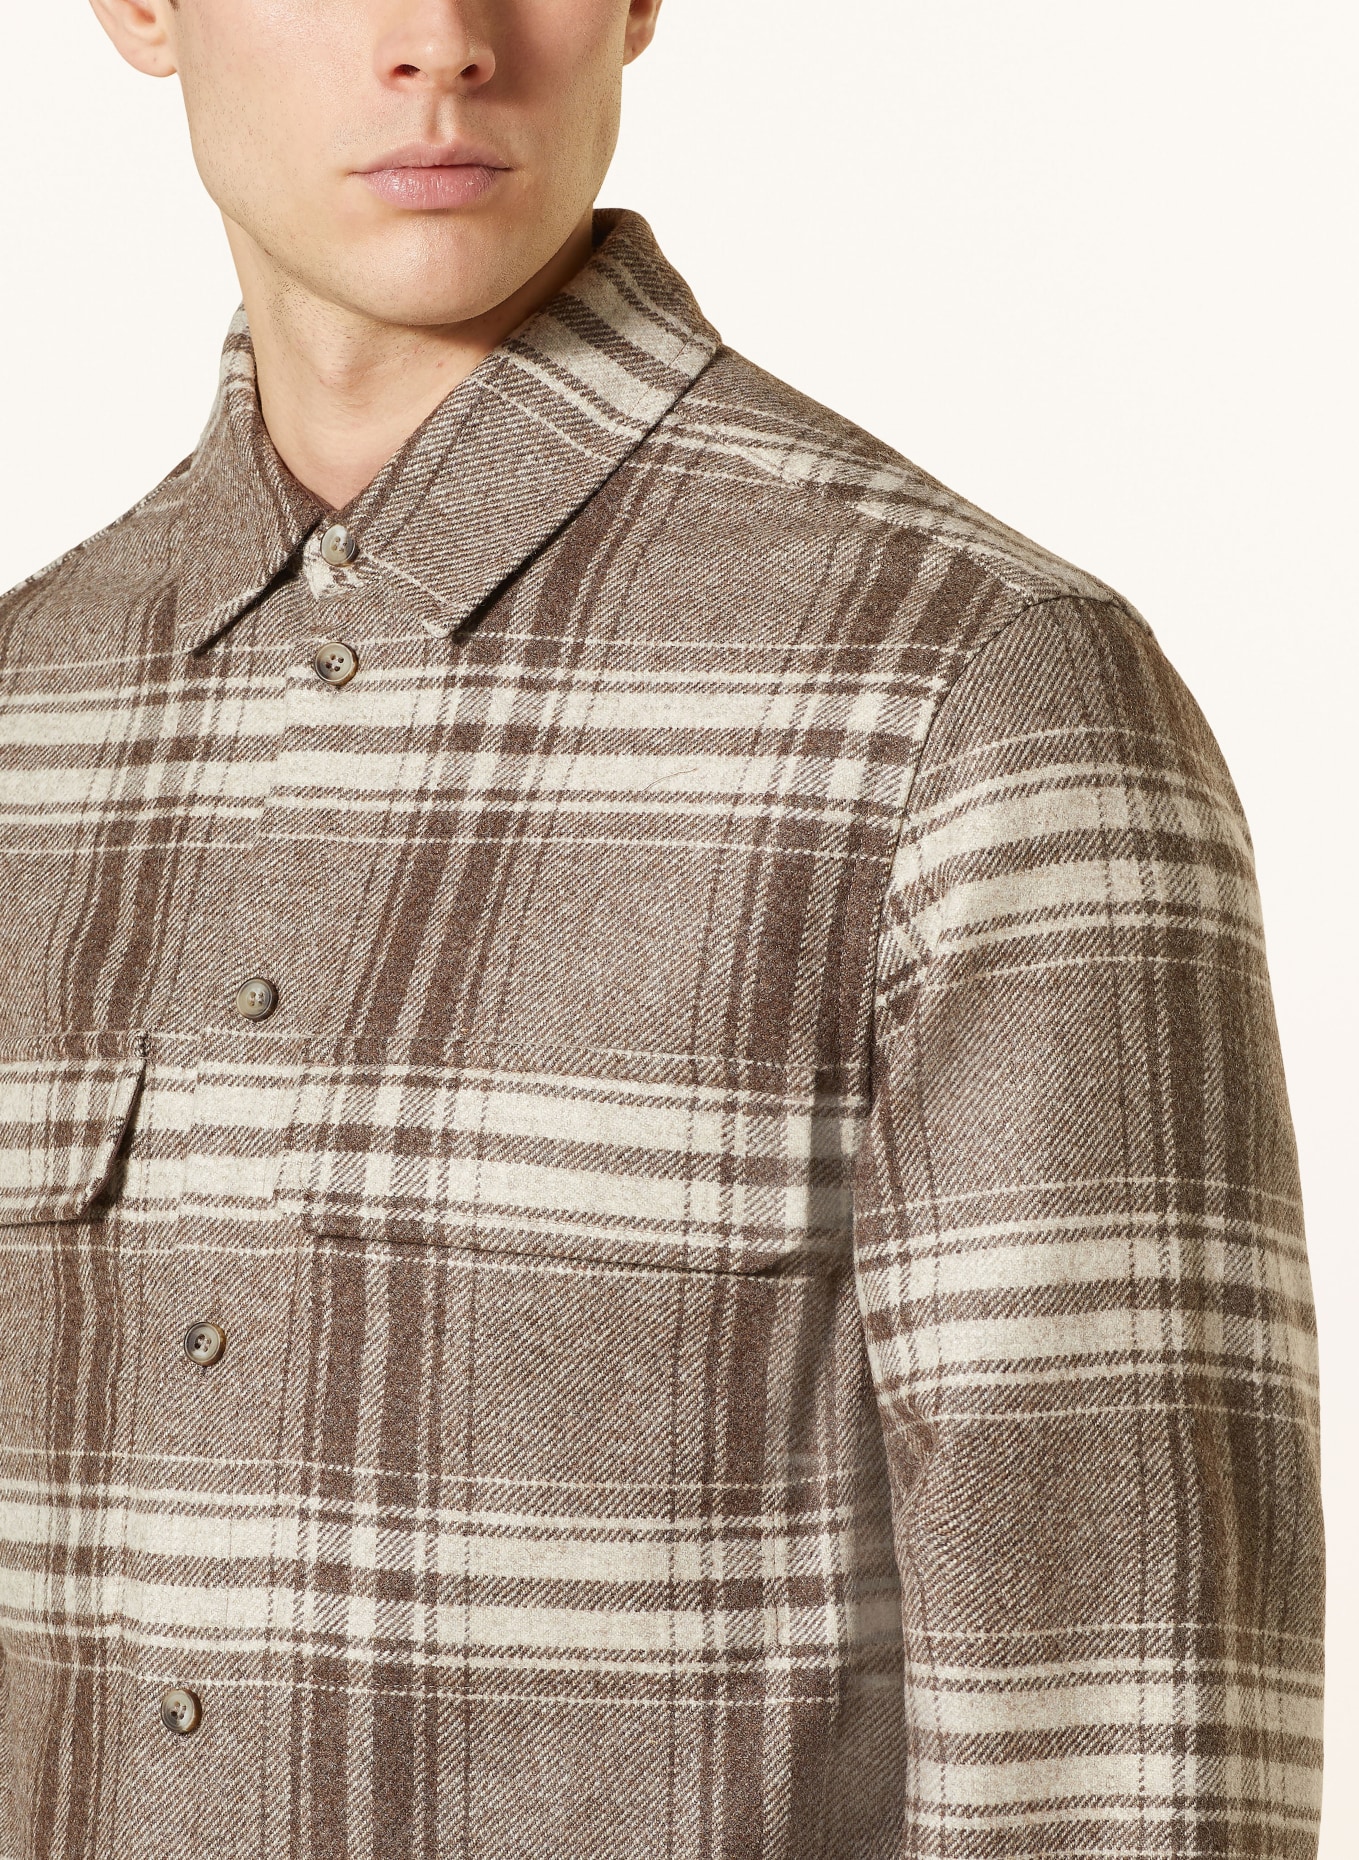 COS Flannel shirt relaxed fit, Color: BEIGE/ BROWN/ DARK BROWN (Image 4)